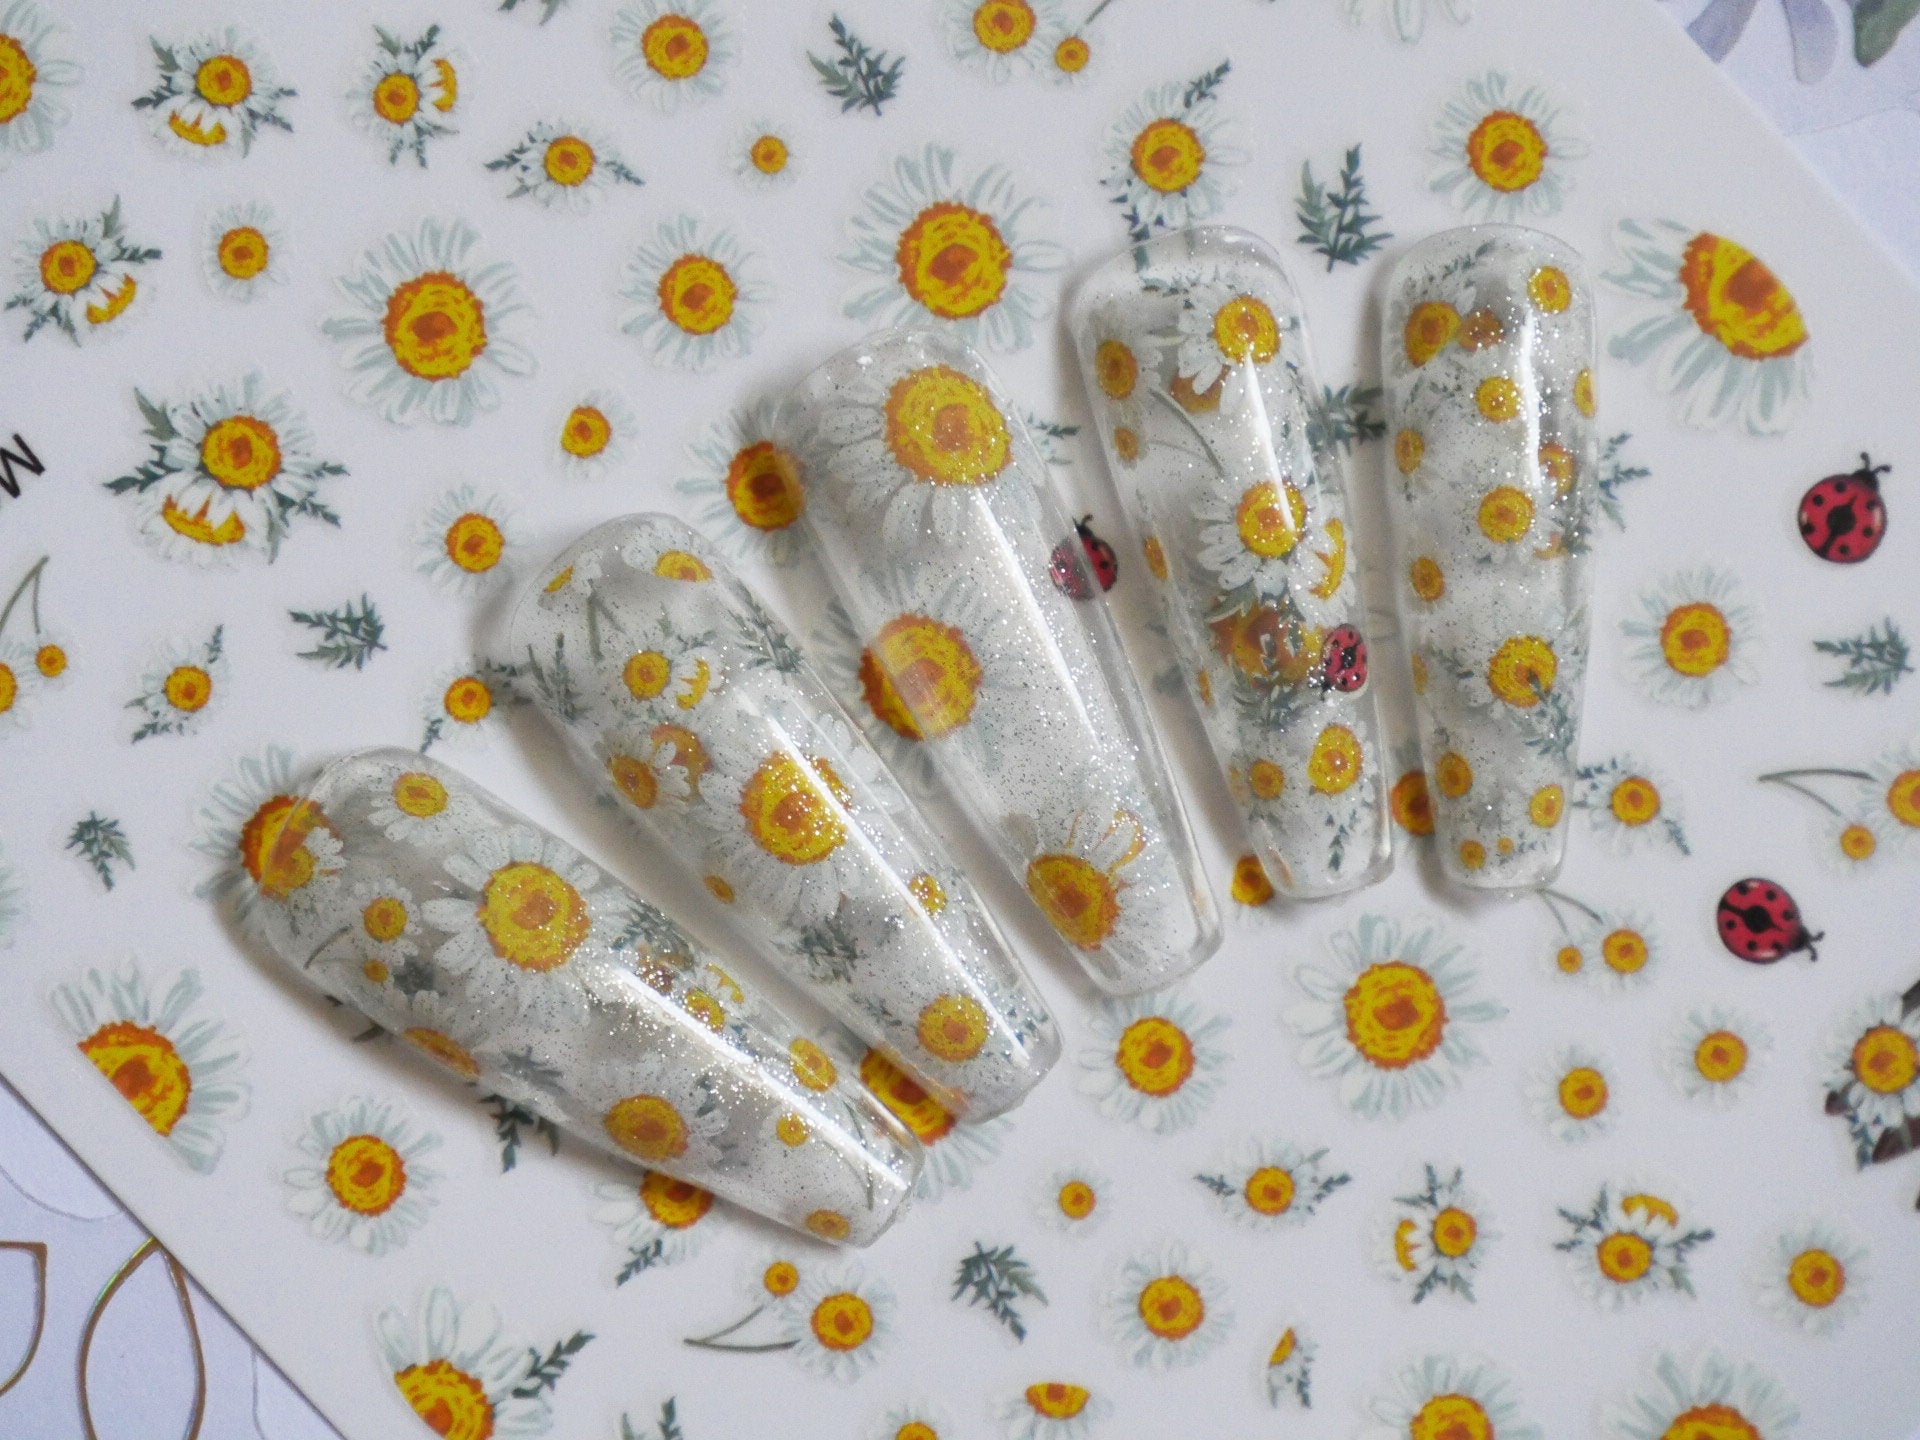 Daisy flower Nail Art Sticker Peel off daisies Stickers/ Beetle Leaf Bouquet white flower Blossom Manicure Nail Supply